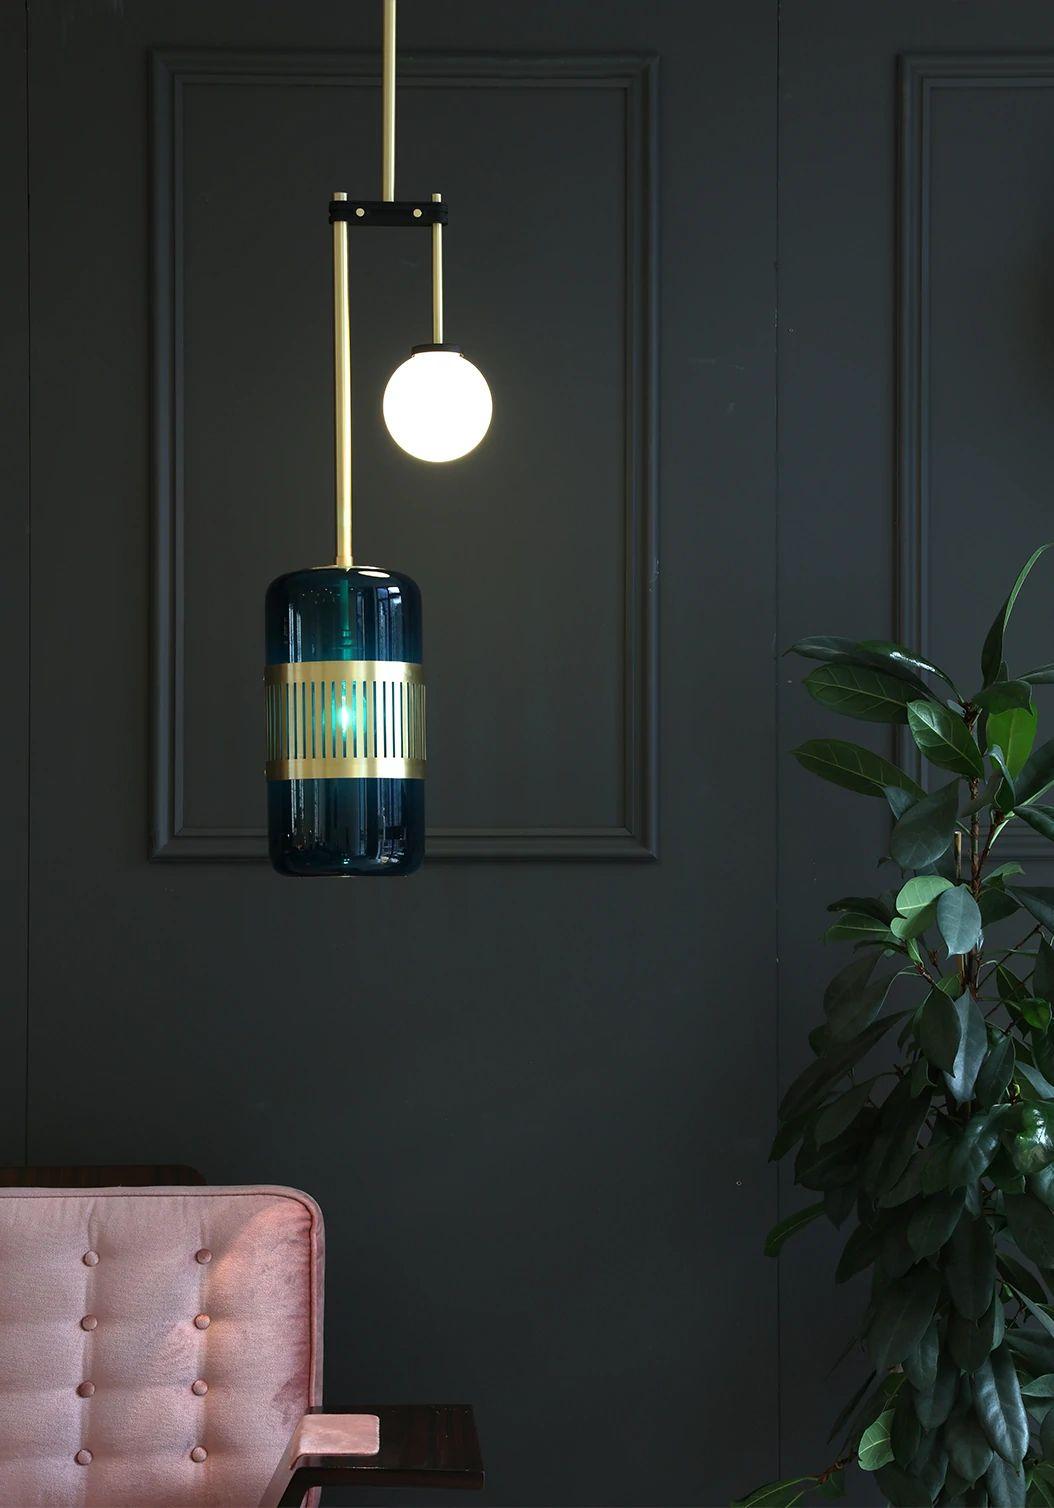 Blue Lizak drop pendant by Bert Frank
Dimensions: D 78 x W 27 x H 78 cm
Materials: Brass and glass

Available finishes: Brass, opal and blue
All our lamps can be wired according to each country. If sold to the USA it will be wired for the USA